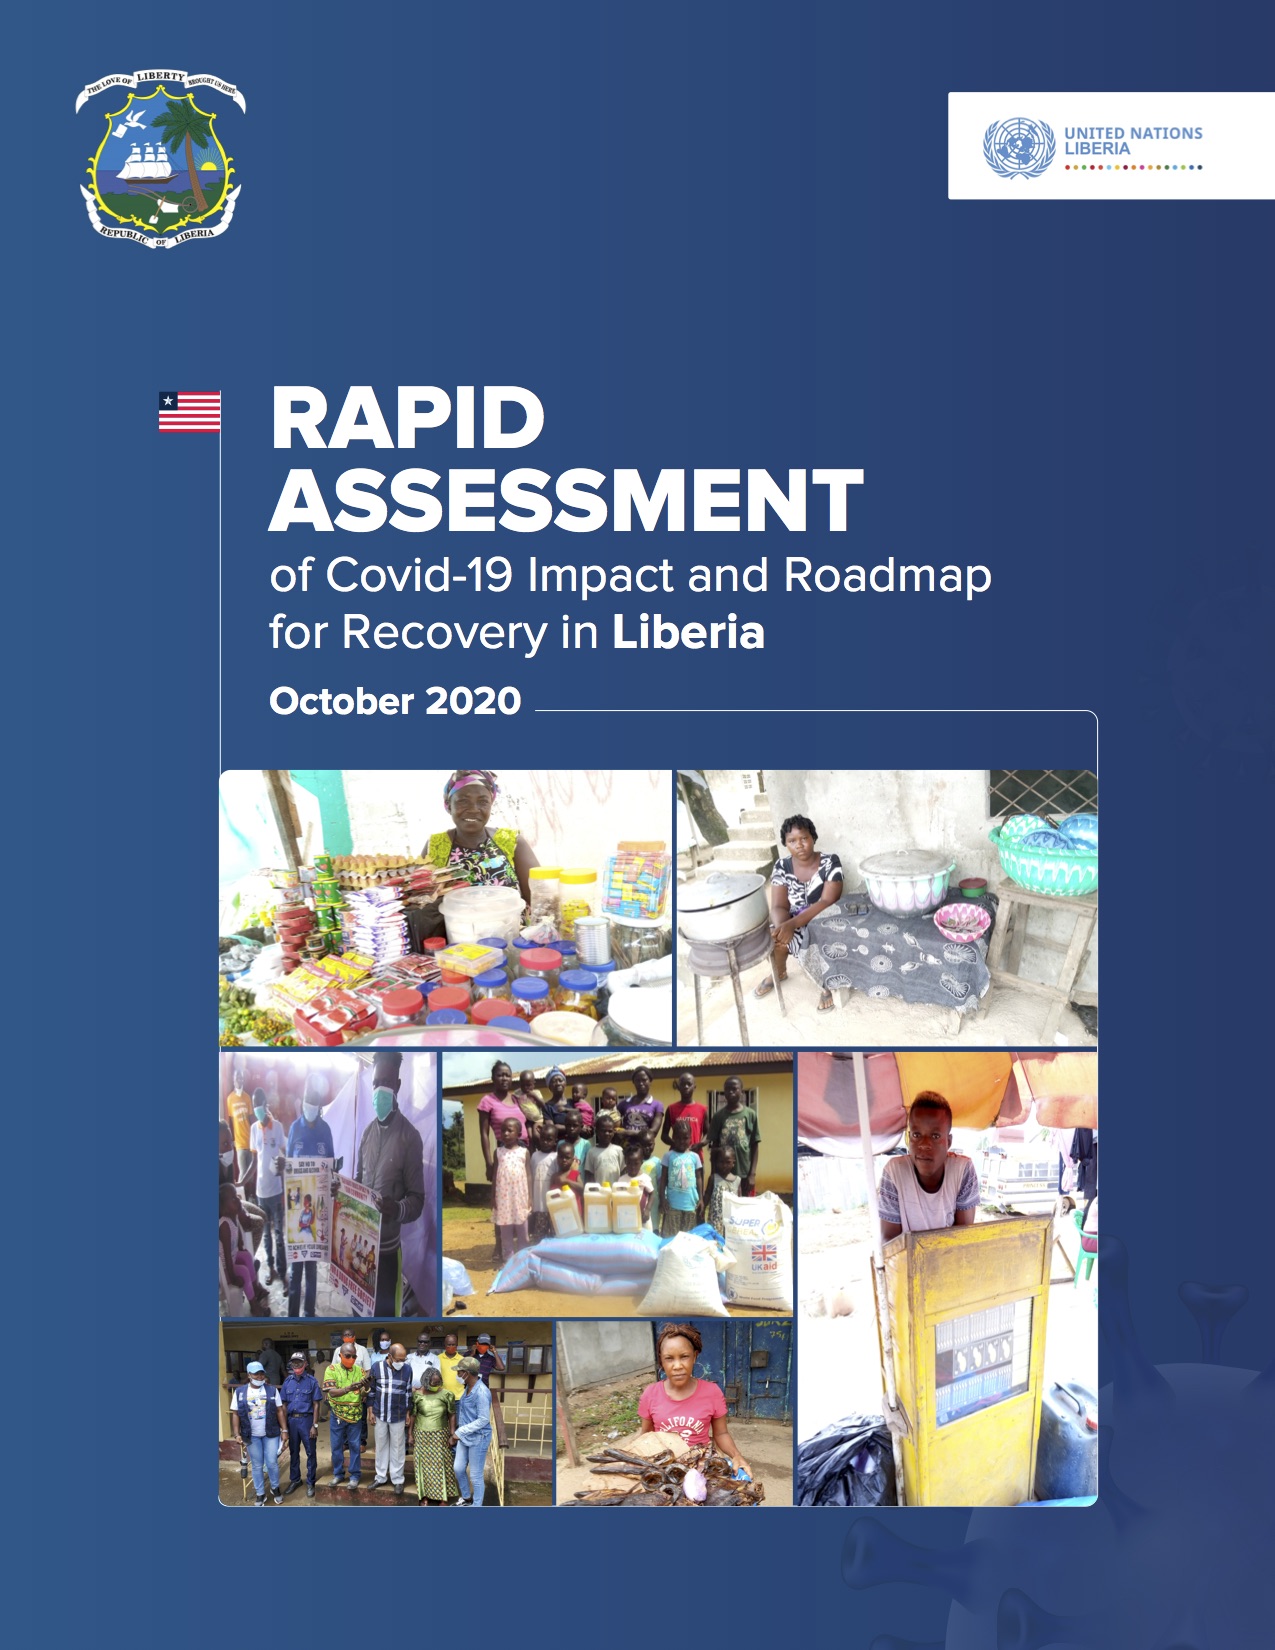 Rapid Assessment of Covid-19 Impact and Roadmap for Recovery in Liberia